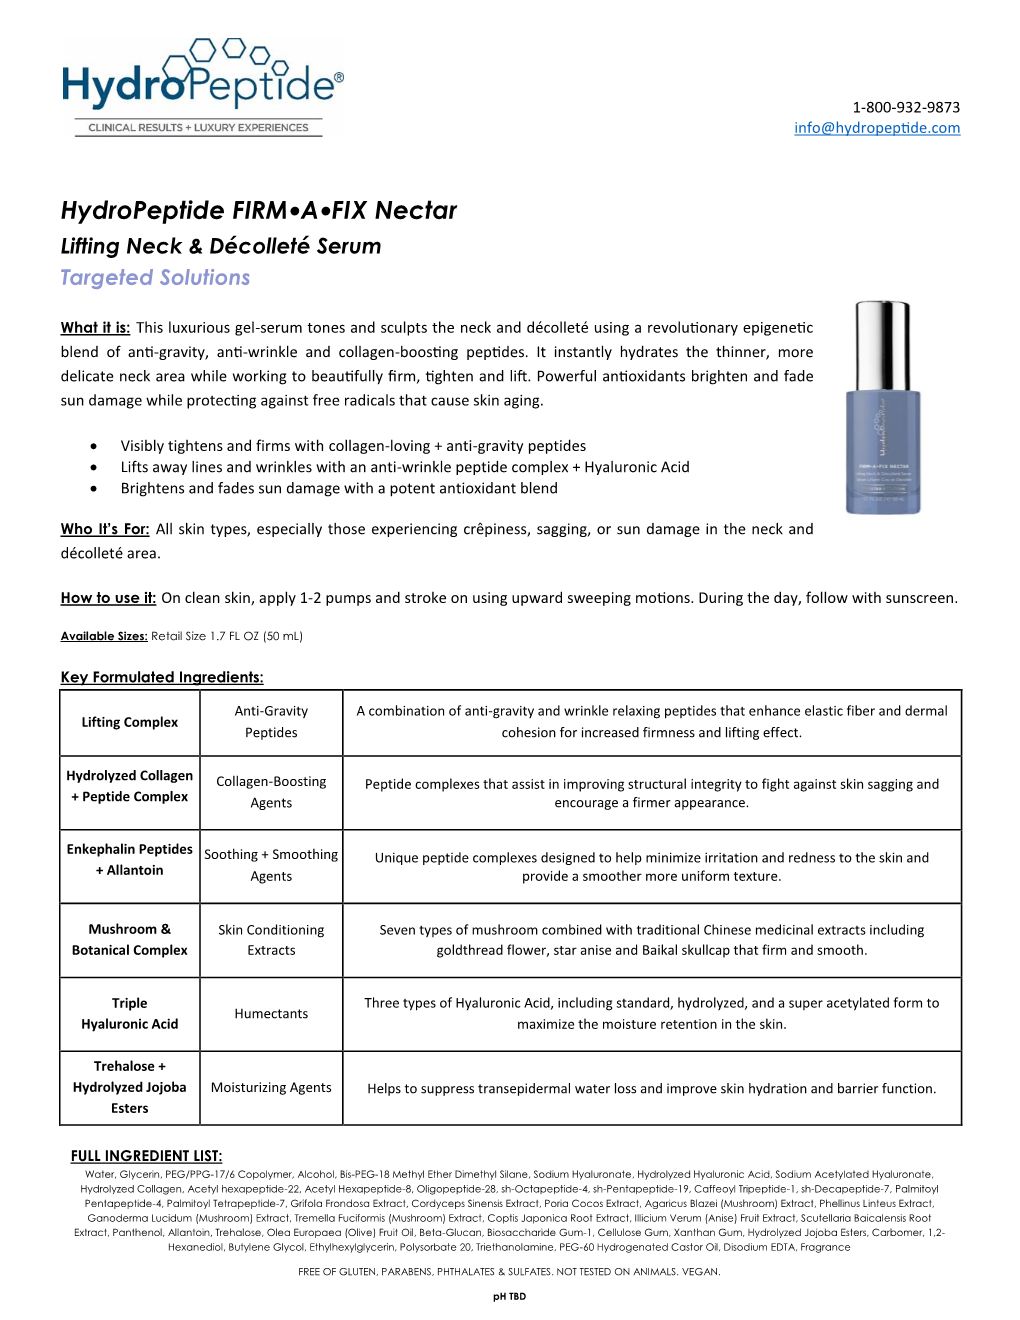 Hydropeptide FIRM•A•FIX Nectar Lifting Neck & Décolleté Serum Targeted Solutions